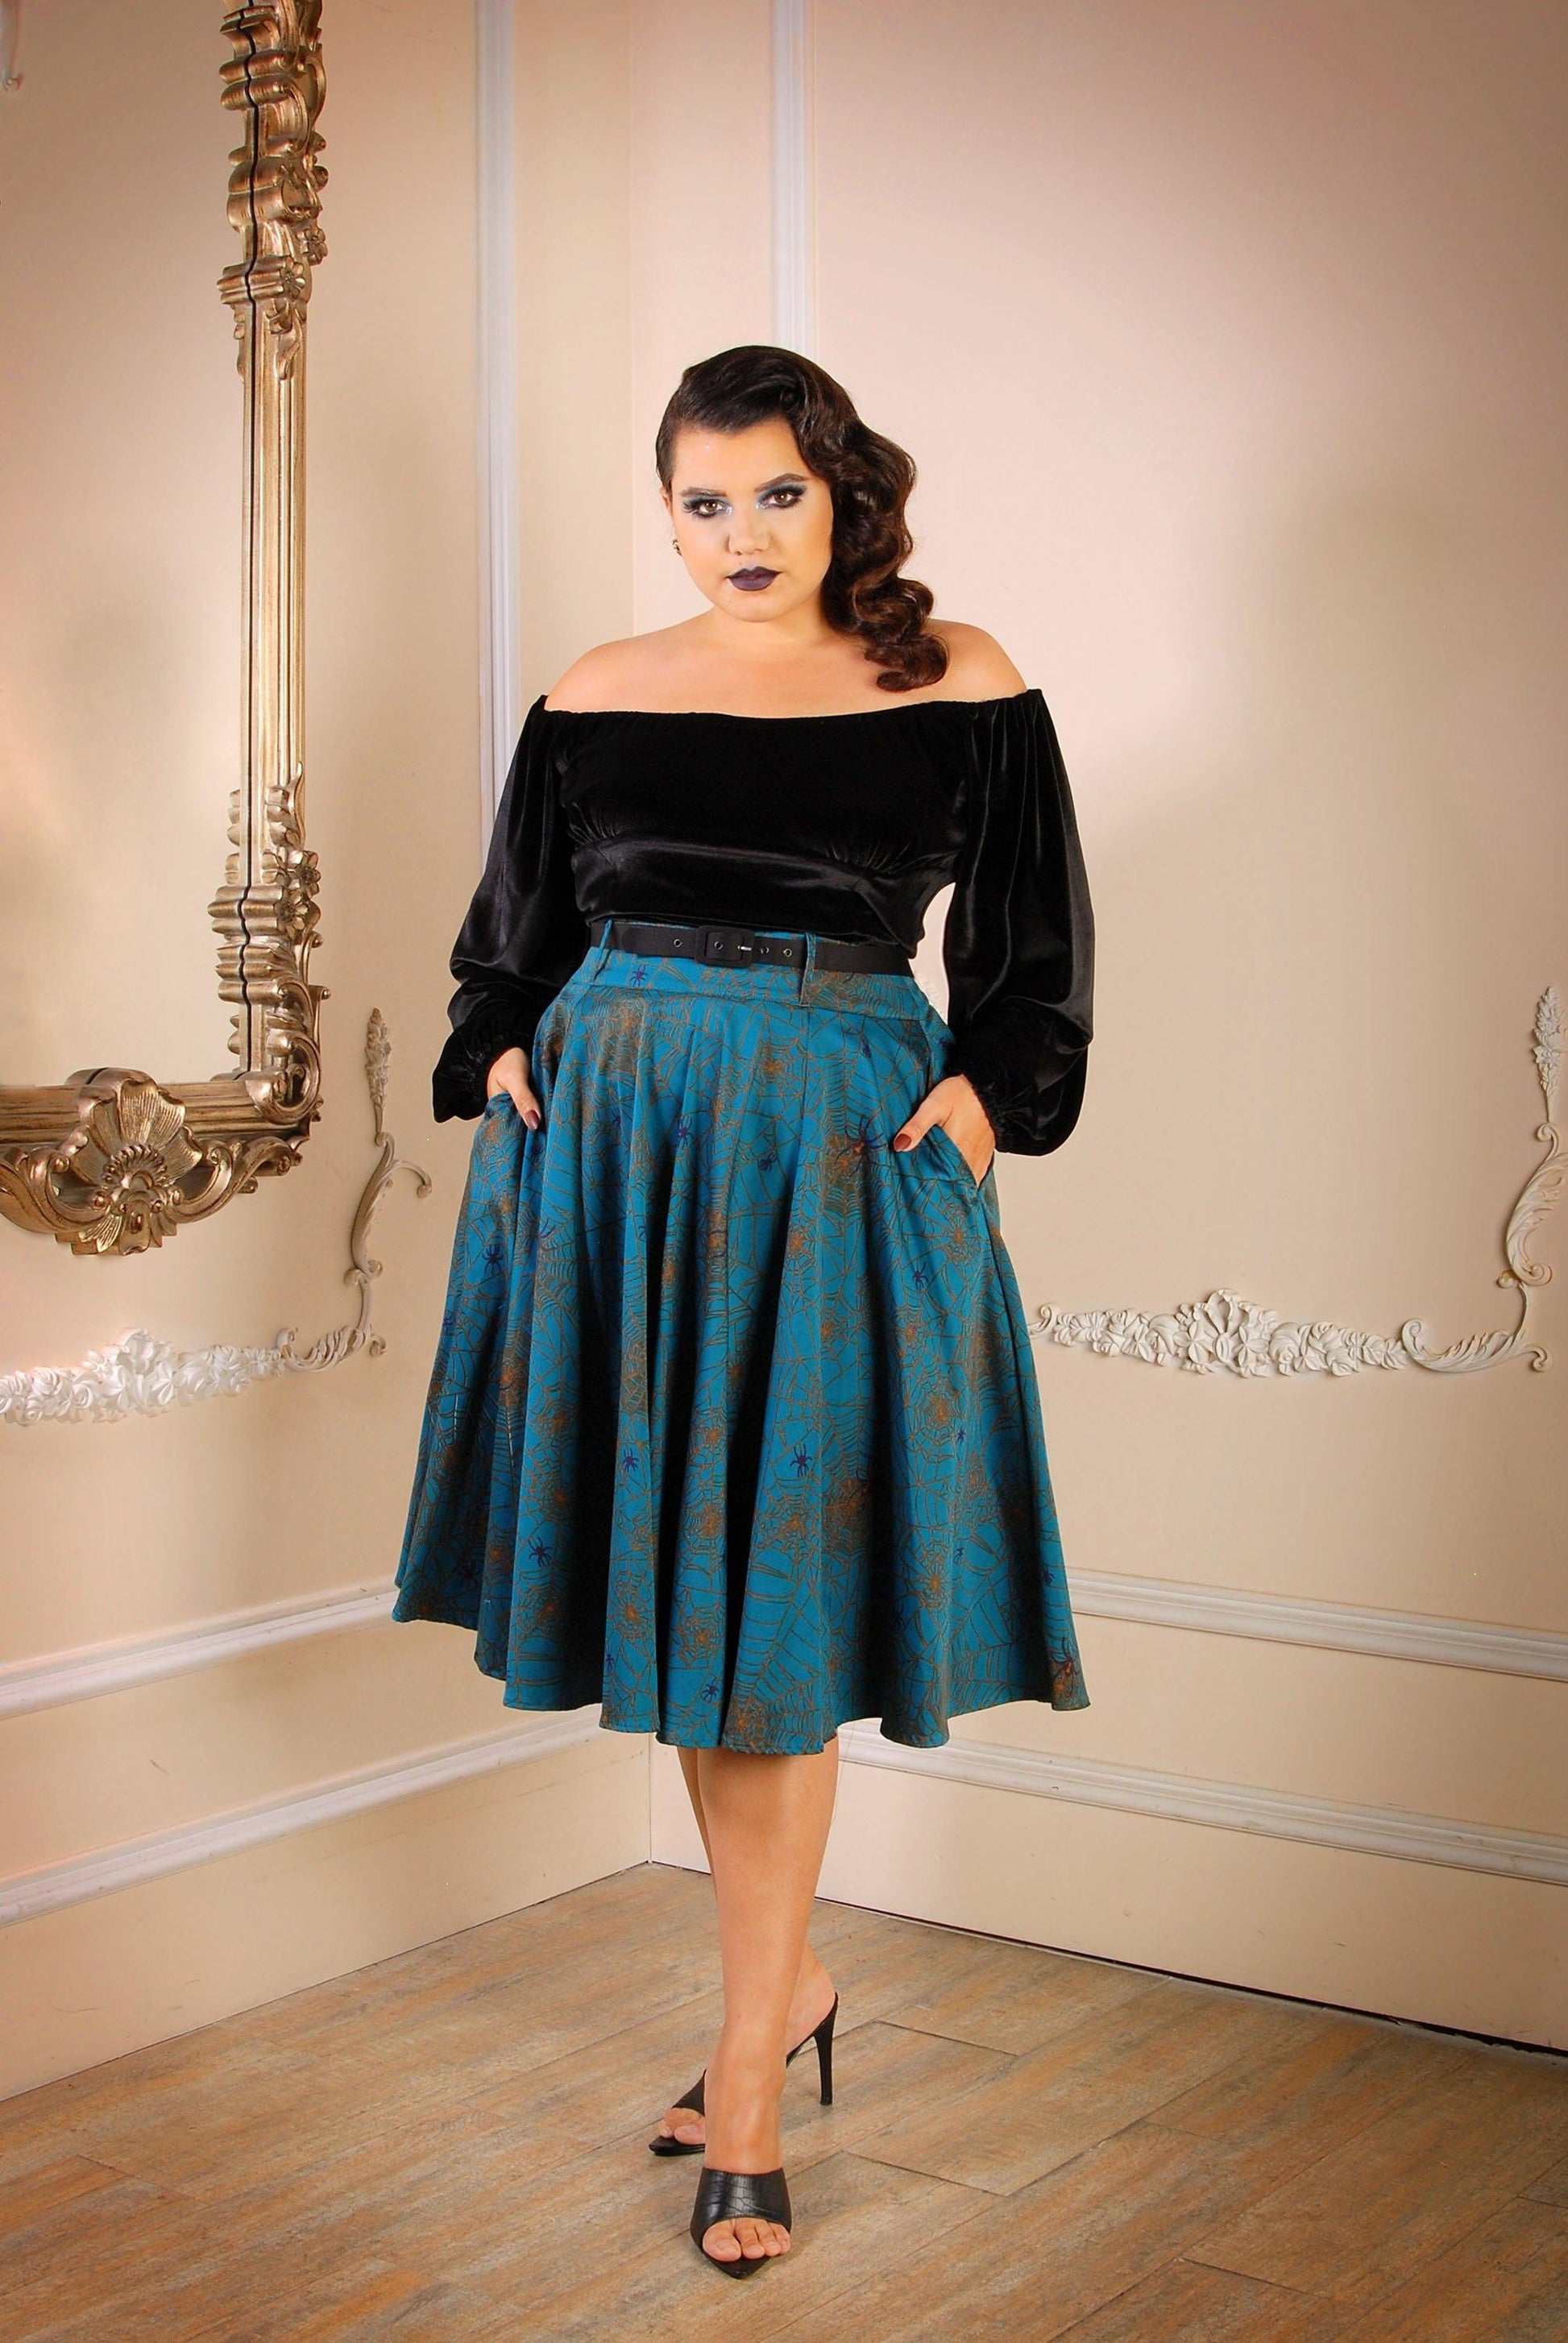 Doris Vintage Swing Skirt with Pockets in Teal Spiderweb Cotton Sateen  |  Pinup Couture - pinupgirlclothing.com